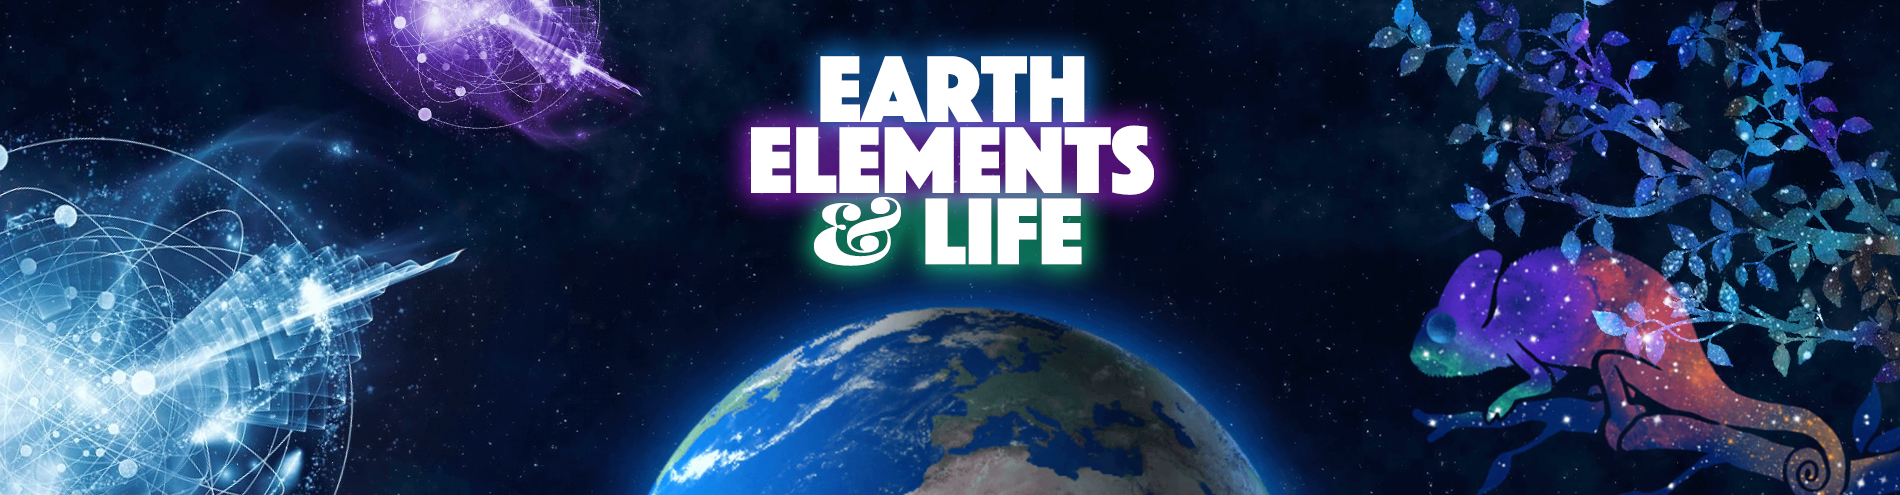 Earth, Elements, and Life Header Galaxy